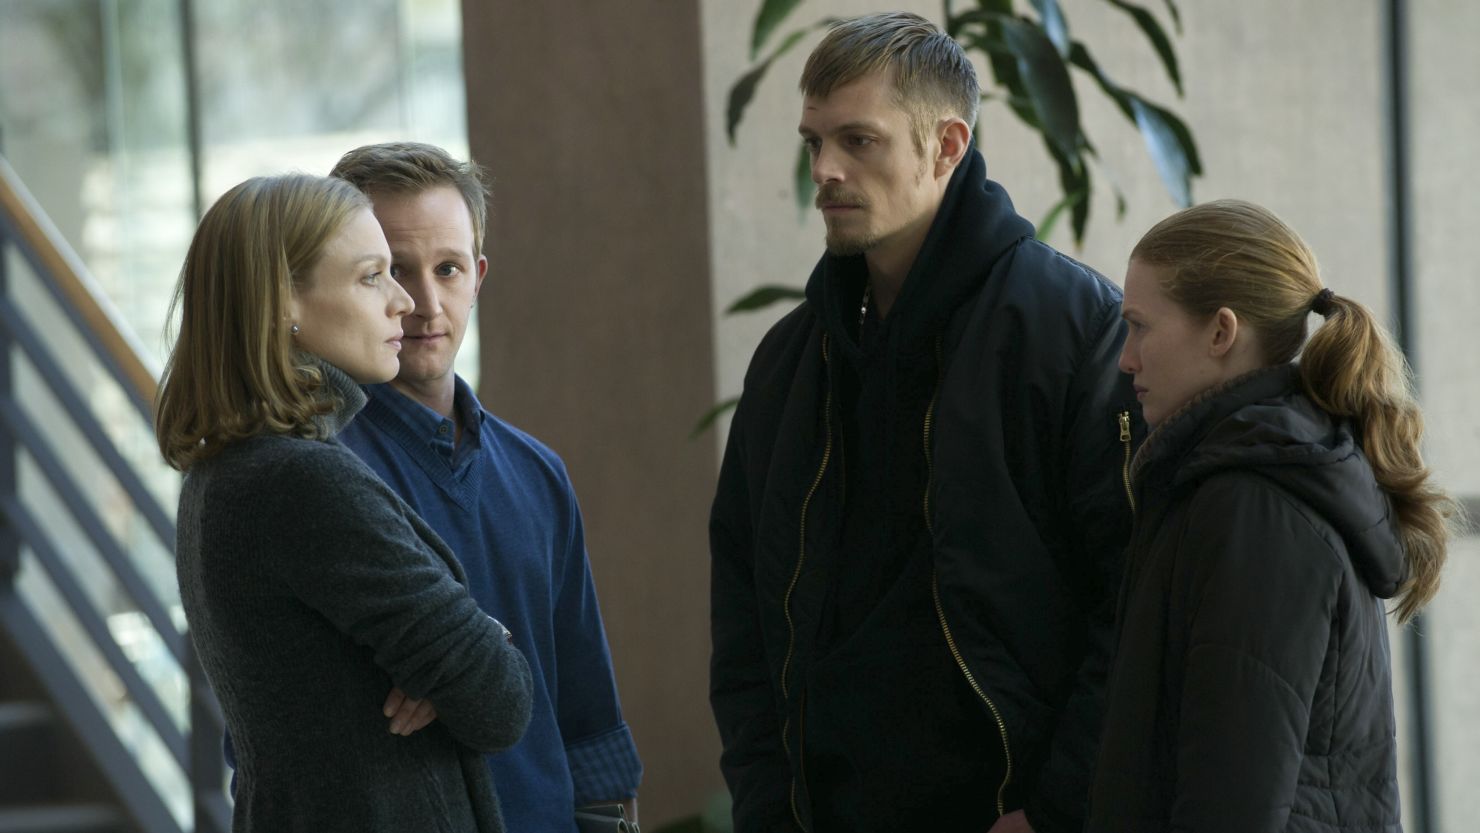 Fox Television Studios hopes "The Killing" could live on at another network.